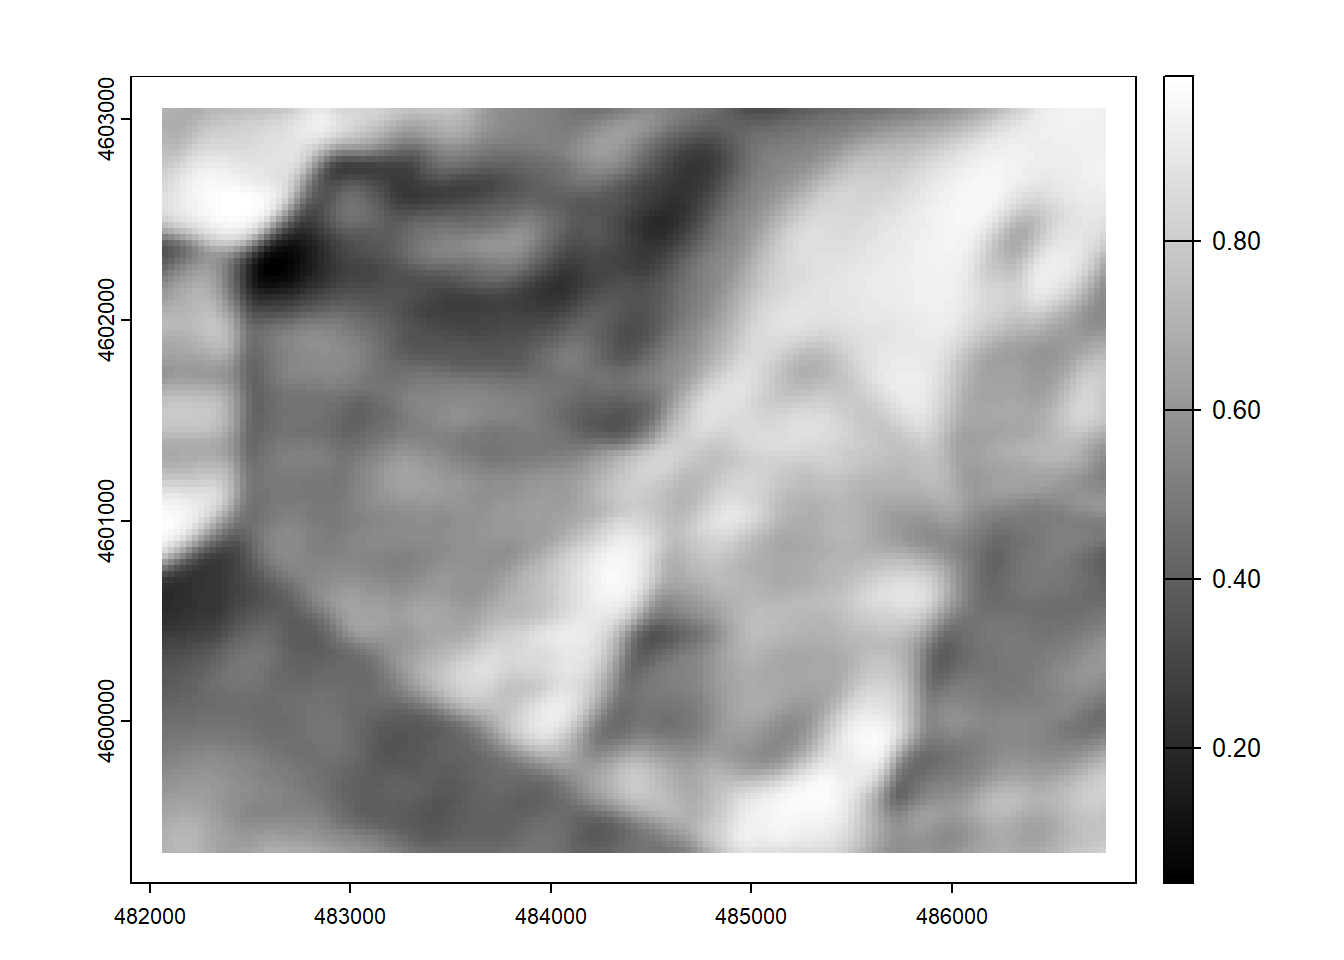 Hillshade of 9x9 focal mean of elevation